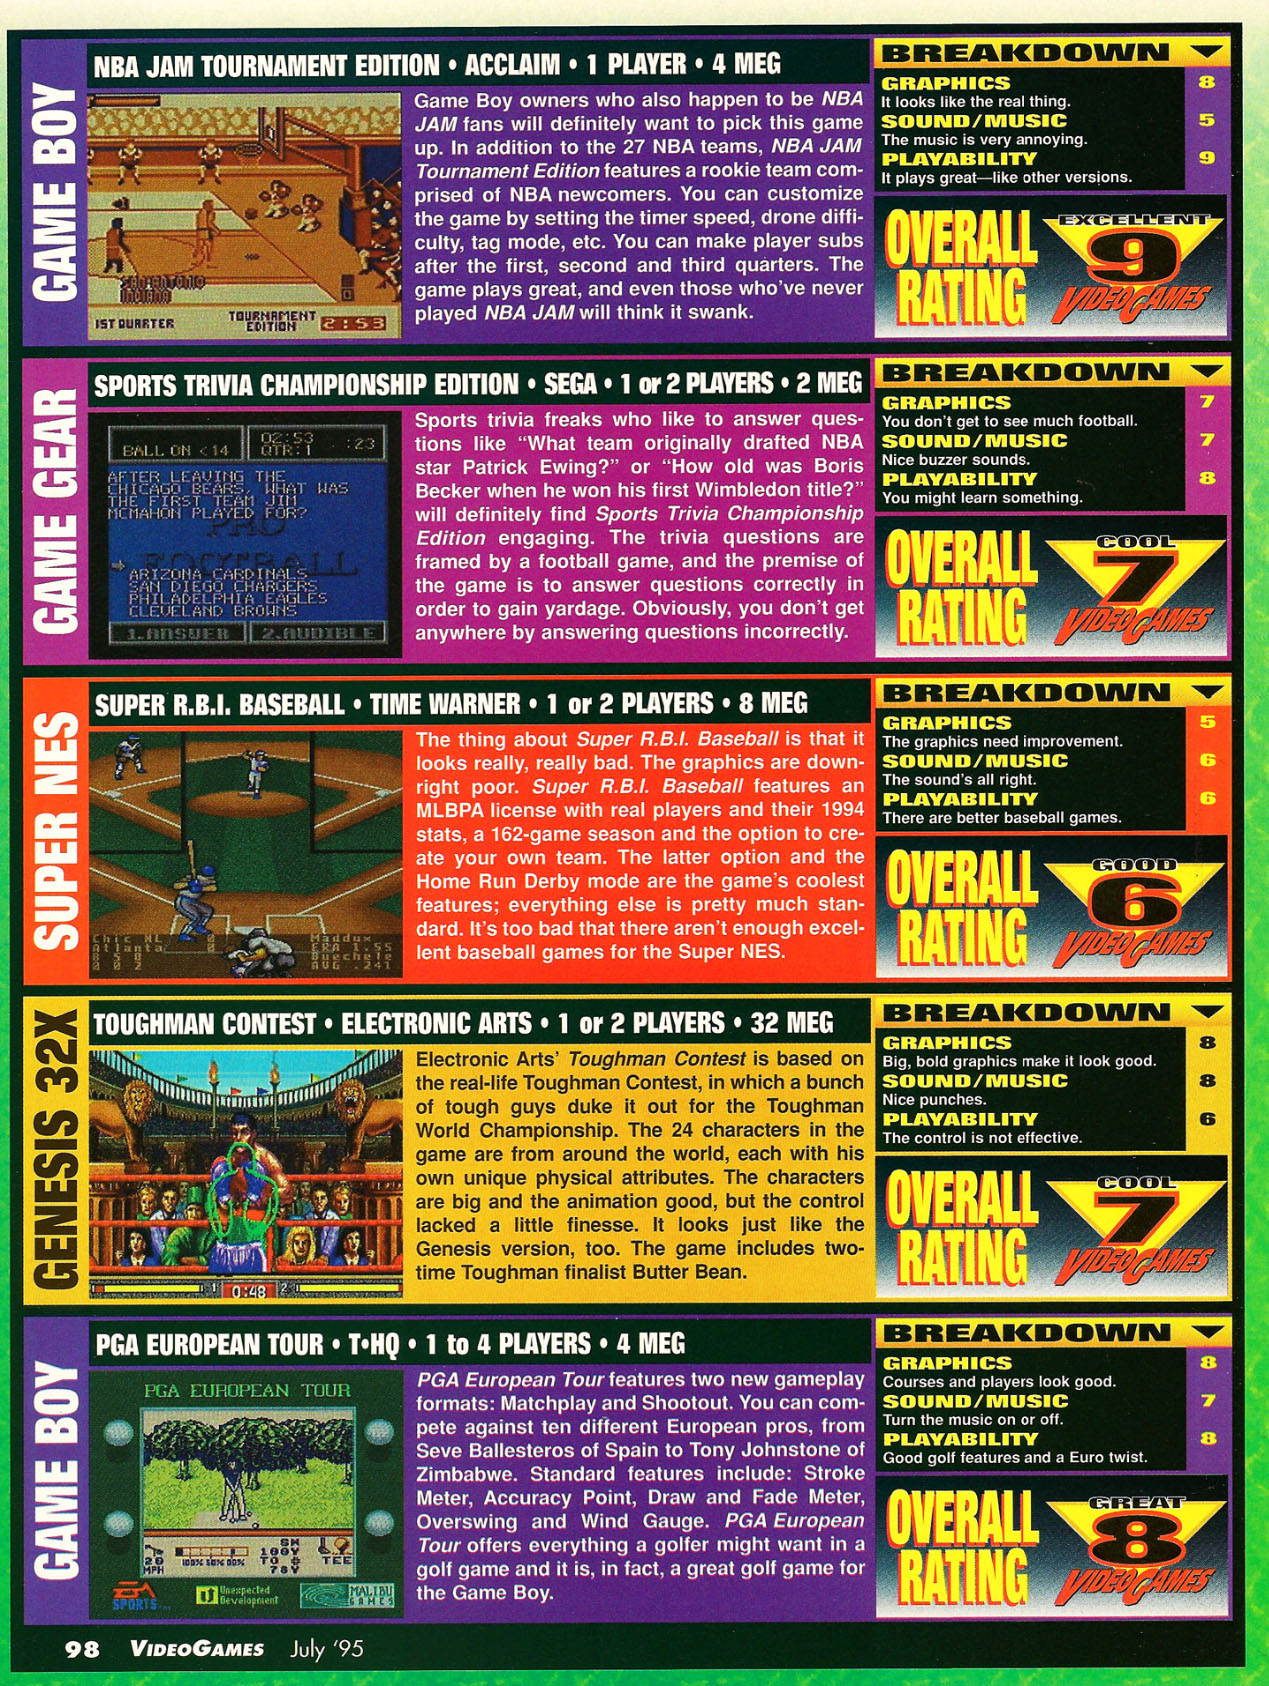 Super RBI Baseball Review, Video Games July 1995 page 98